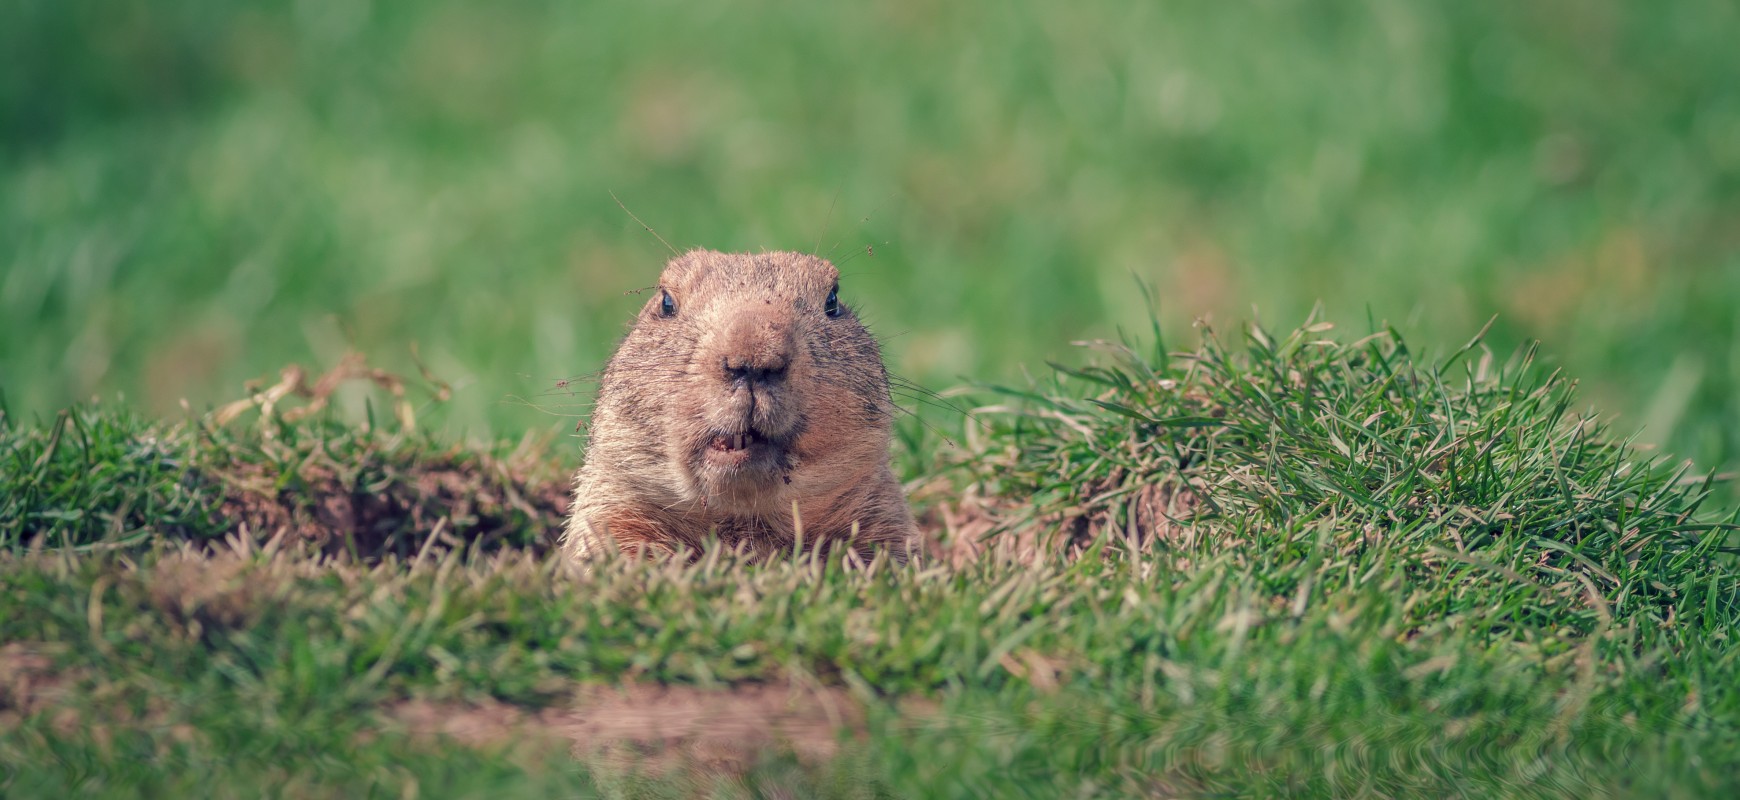 How to Escape Your “GroundHog Days”